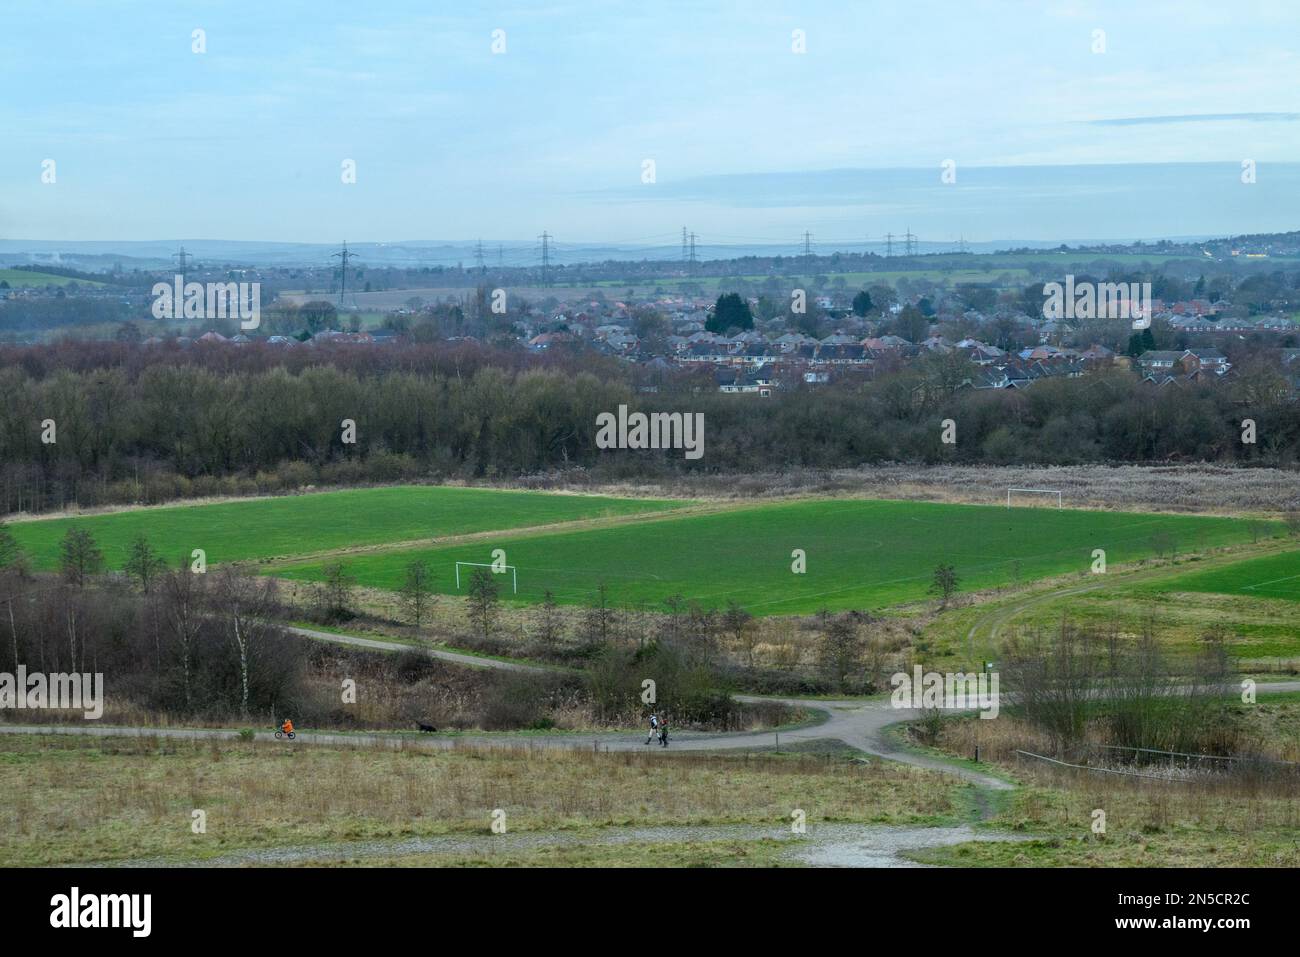 Landscape in northern England with urban area and football pitch, Royston, Barnsley, South Yorkshire, England, UK Stock Photo